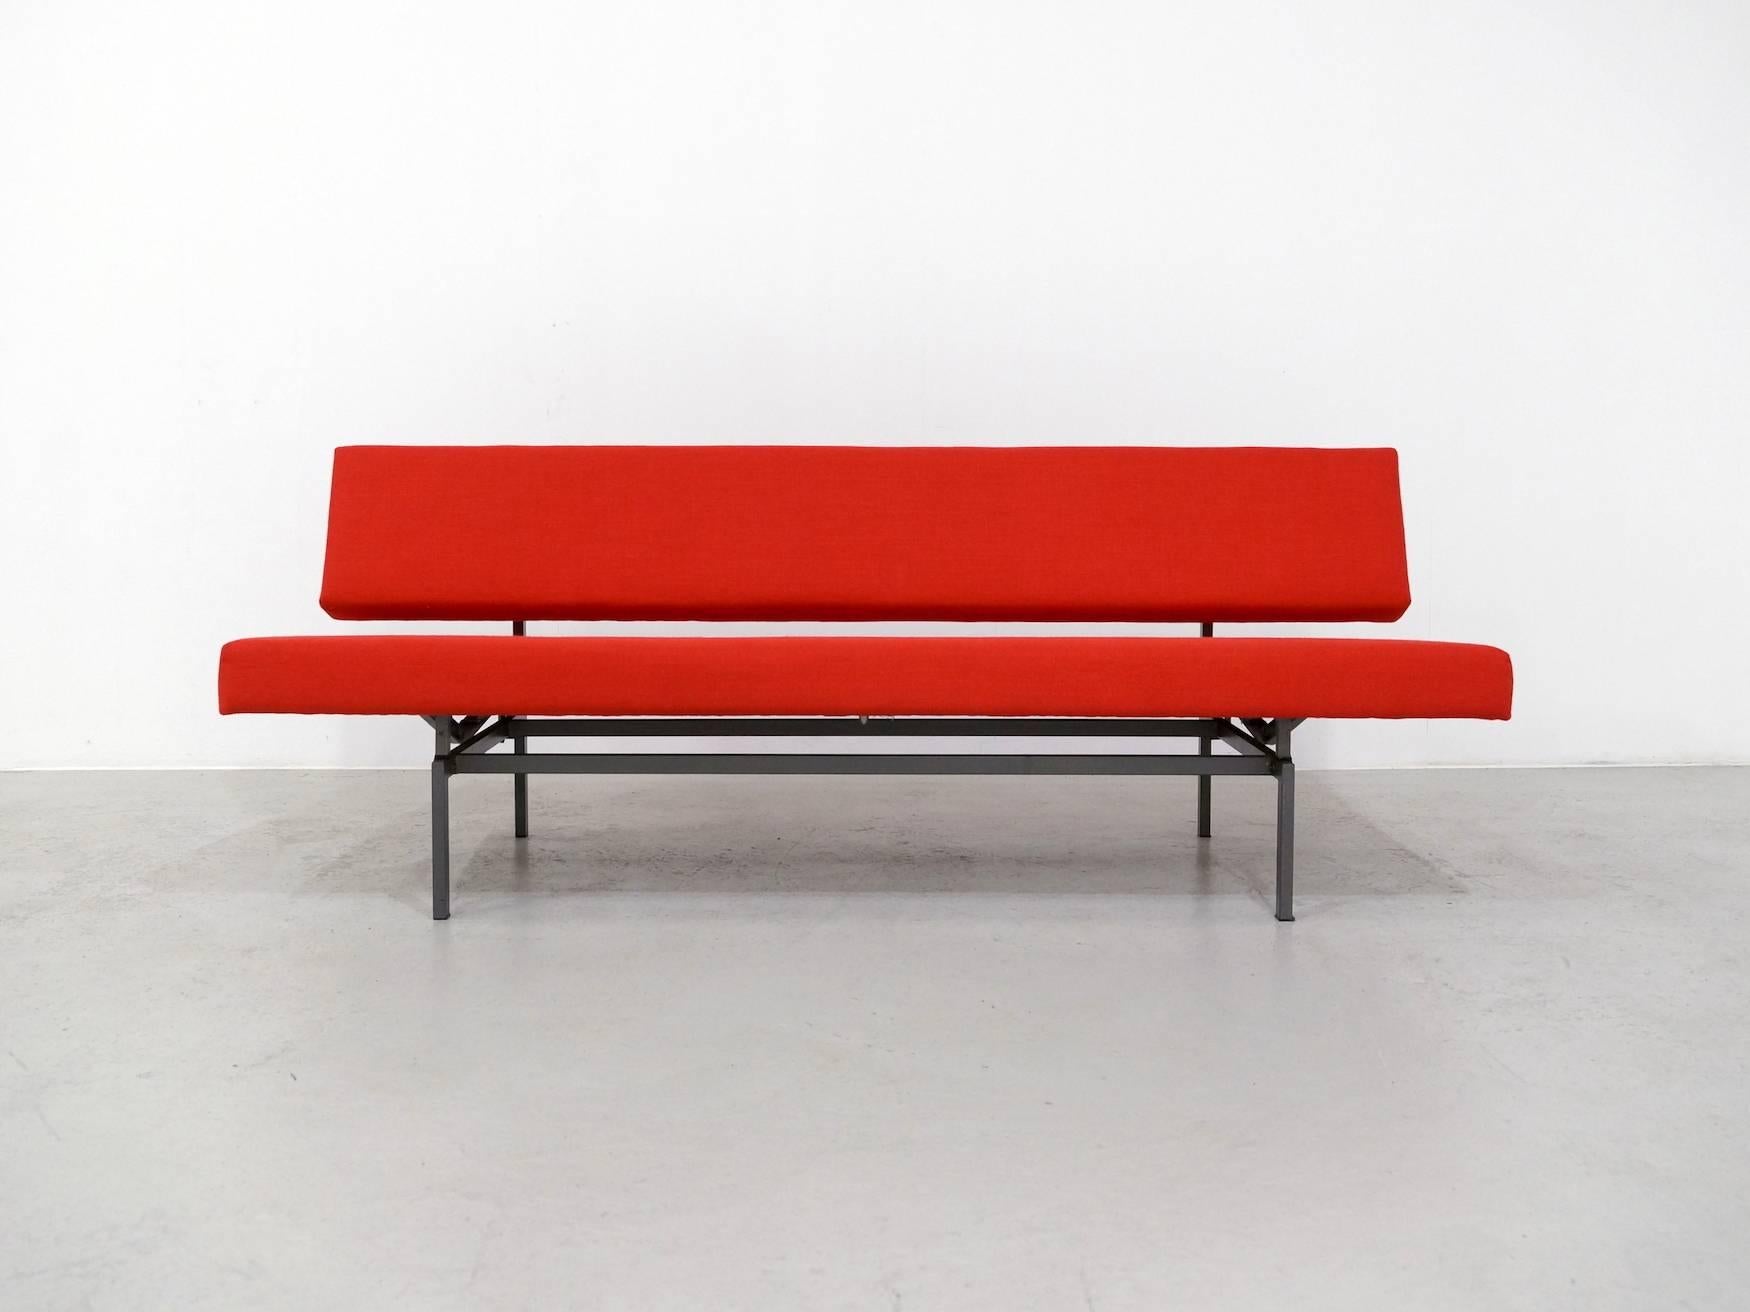 Minimalistic Dutch daybed sofa designed by Rob Parry and made by Gelderland in the 1960s.
This three seat sofa is fully restored with new foam on the inside and New Red Tissue on the outside 
The seating can be pulled forward to make it a (day) bed.